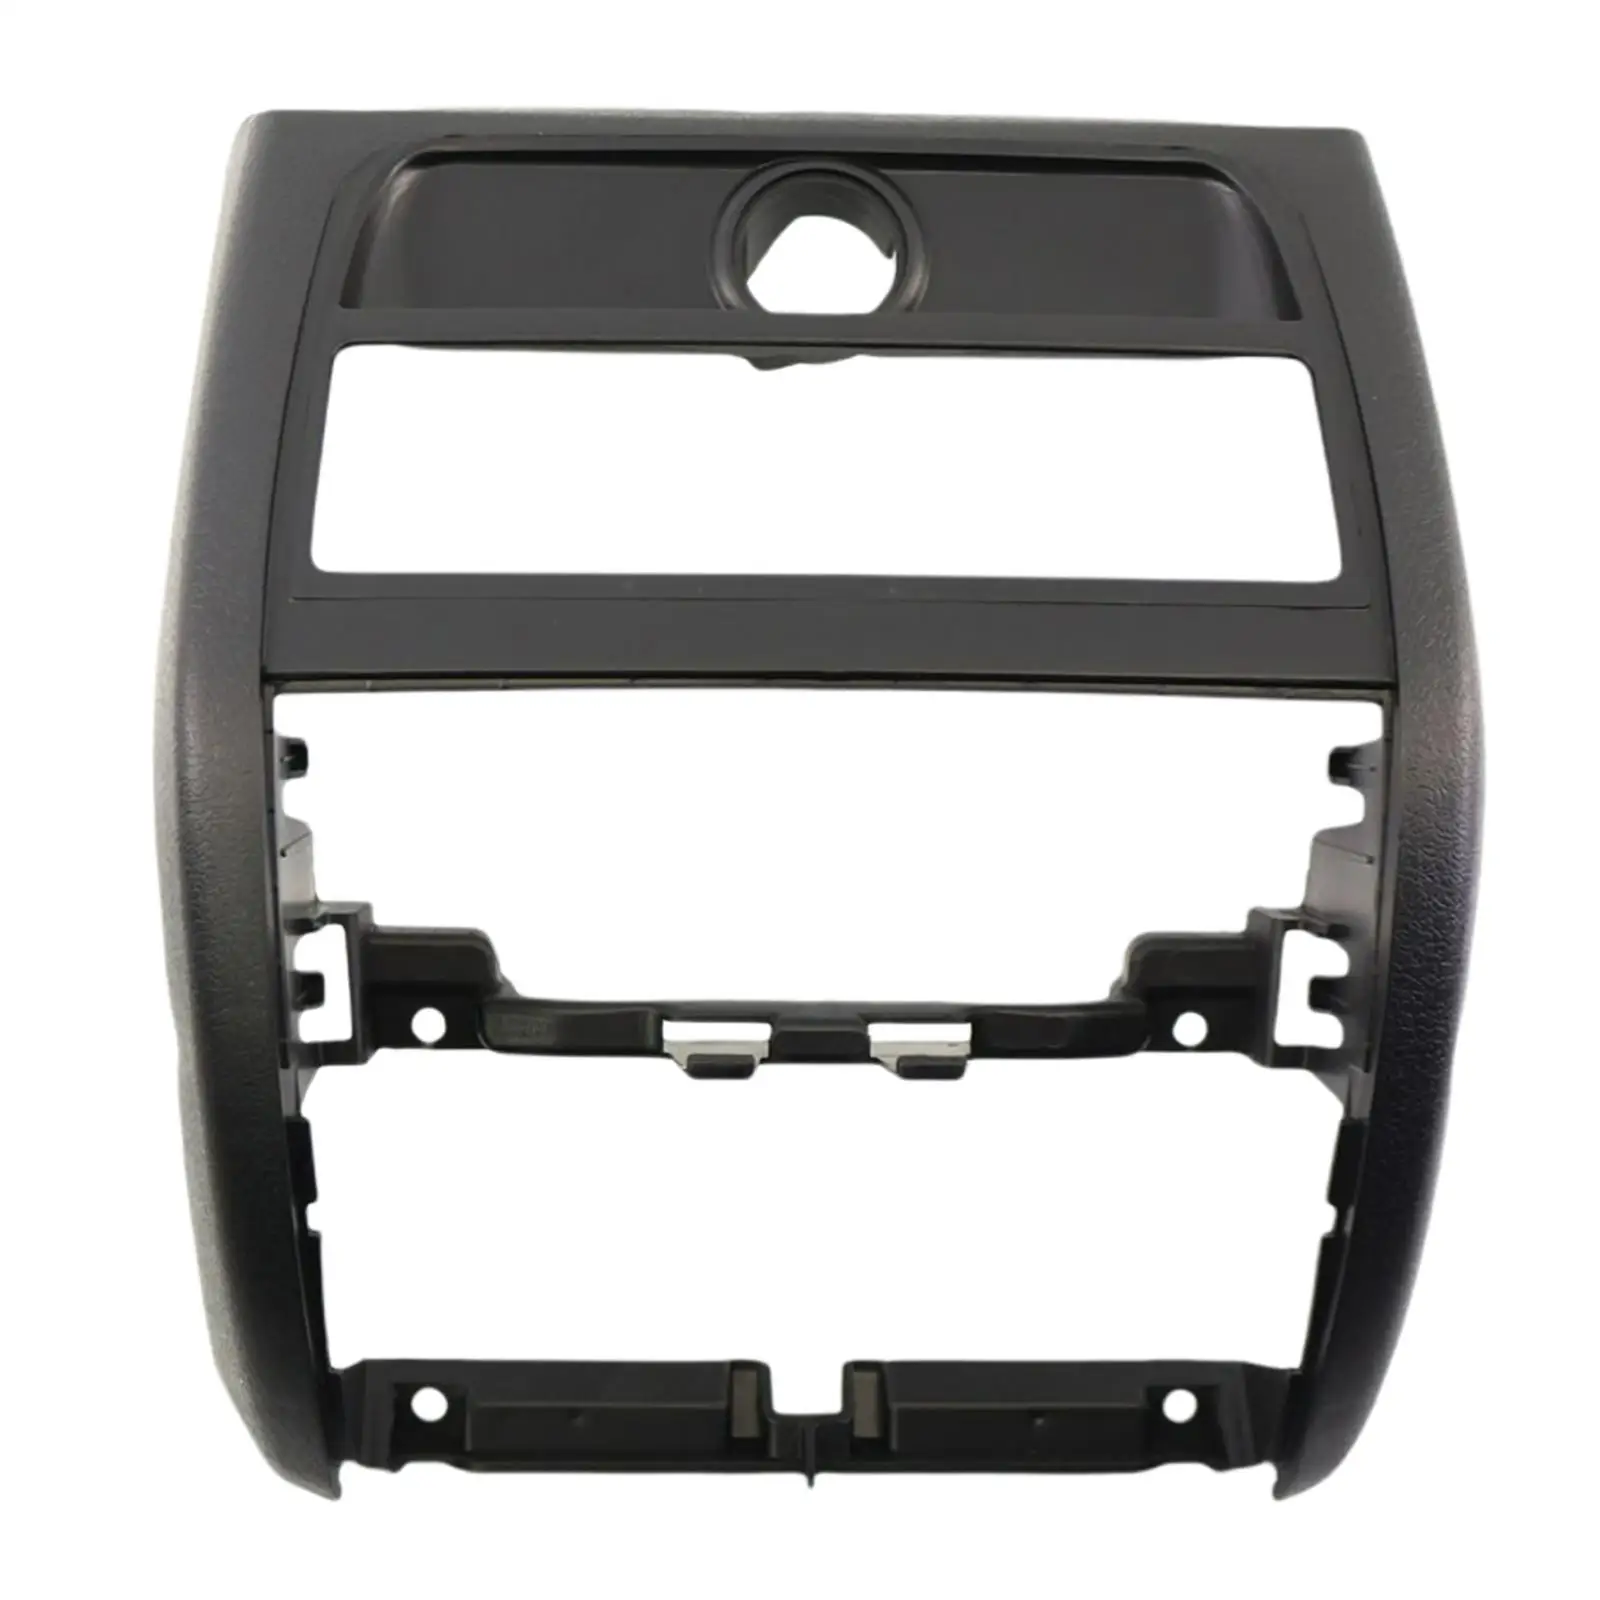 Rear Air Conditioner Outlet Vent Grille  51169206789 Interior  ,Blk ,Centre Console Cover Panel Plate for 2011 M5